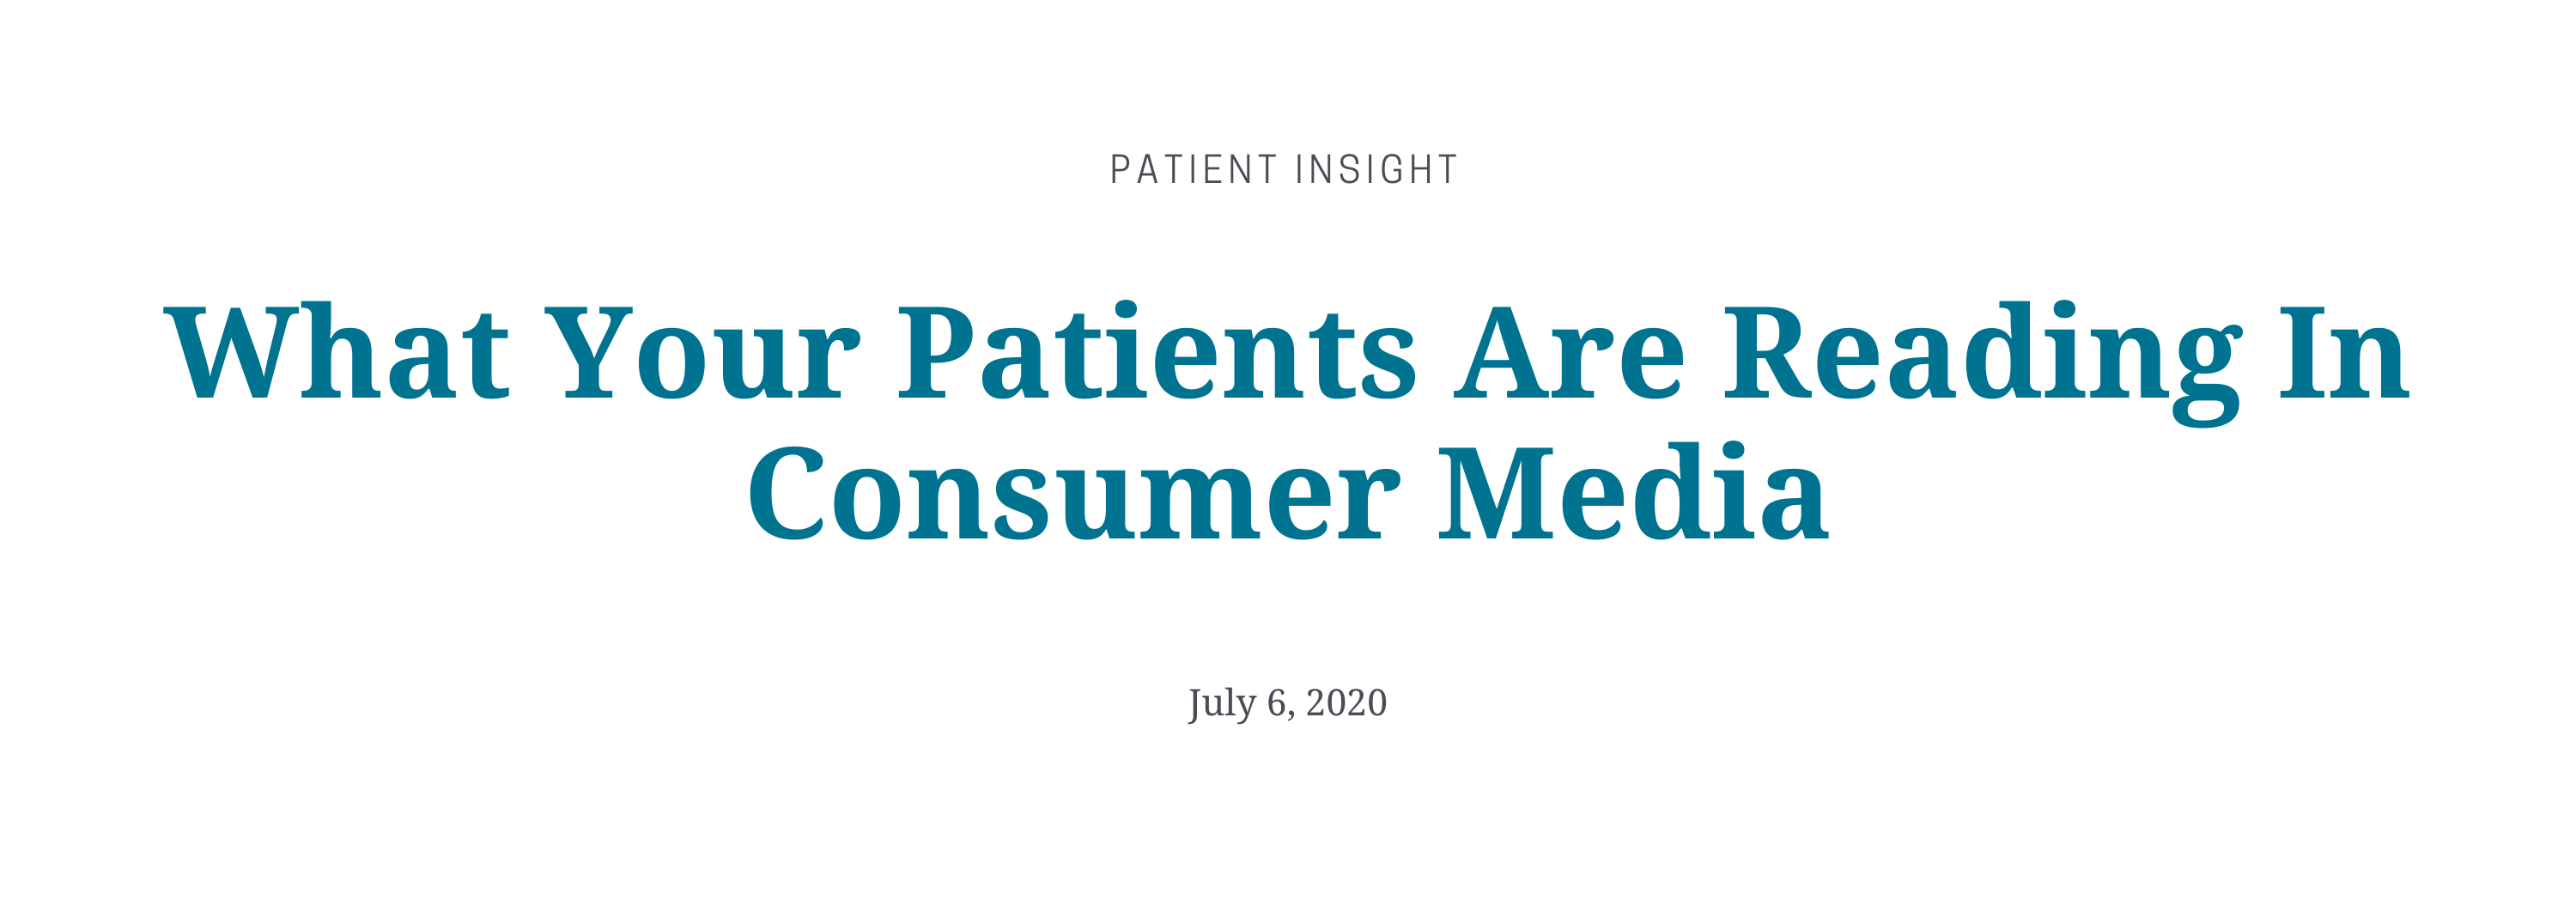 patient insight july 6